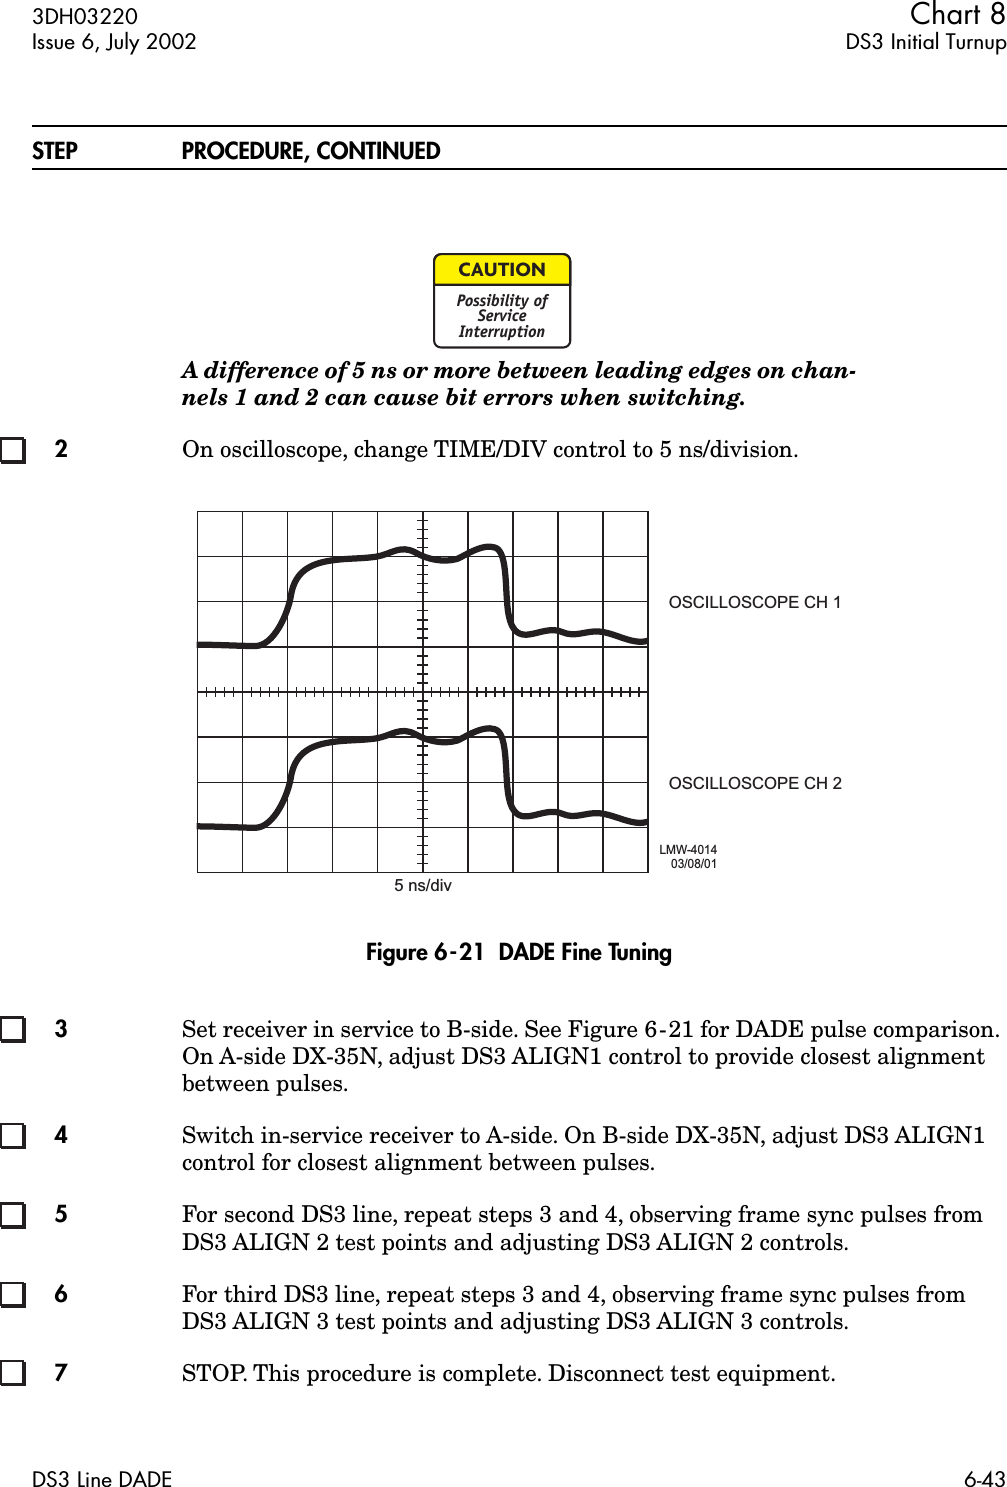 3DH03220 Chart 8Issue 6, July 2002 DS3 Initial TurnupDS3 Line DADE 6-43STEP PROCEDURE, CONTINUEDA difference of 5 ns or more between leading edges on chan-nels 1 and 2 can cause bit errors when switching. 2On oscilloscope, change TIME/DIV control to 5 ns/division. Figure 6-21  DADE Fine Tuning3Set receiver in service to B-side. See Figure 6-21 for DADE pulse comparison. On A-side DX-35N, adjust DS3 ALIGN1 control to provide closest alignment between pulses.4Switch in-service receiver to A-side. On B-side DX-35N, adjust DS3 ALIGN1 control for closest alignment between pulses.5For second DS3 line, repeat steps 3 and 4, observing frame sync pulses from DS3 ALIGN 2 test points and adjusting DS3 ALIGN 2 controls.6For third DS3 line, repeat steps 3 and 4, observing frame sync pulses from DS3 ALIGN 3 test points and adjusting DS3 ALIGN 3 controls.7STOP. This procedure is complete. Disconnect test equipment.CAUTIONPossibility ofServiceInterruptionLMW-401403/08/01OSCILLOSCOPE CH 1OSCILLOSCOPE CH 25 ns/div